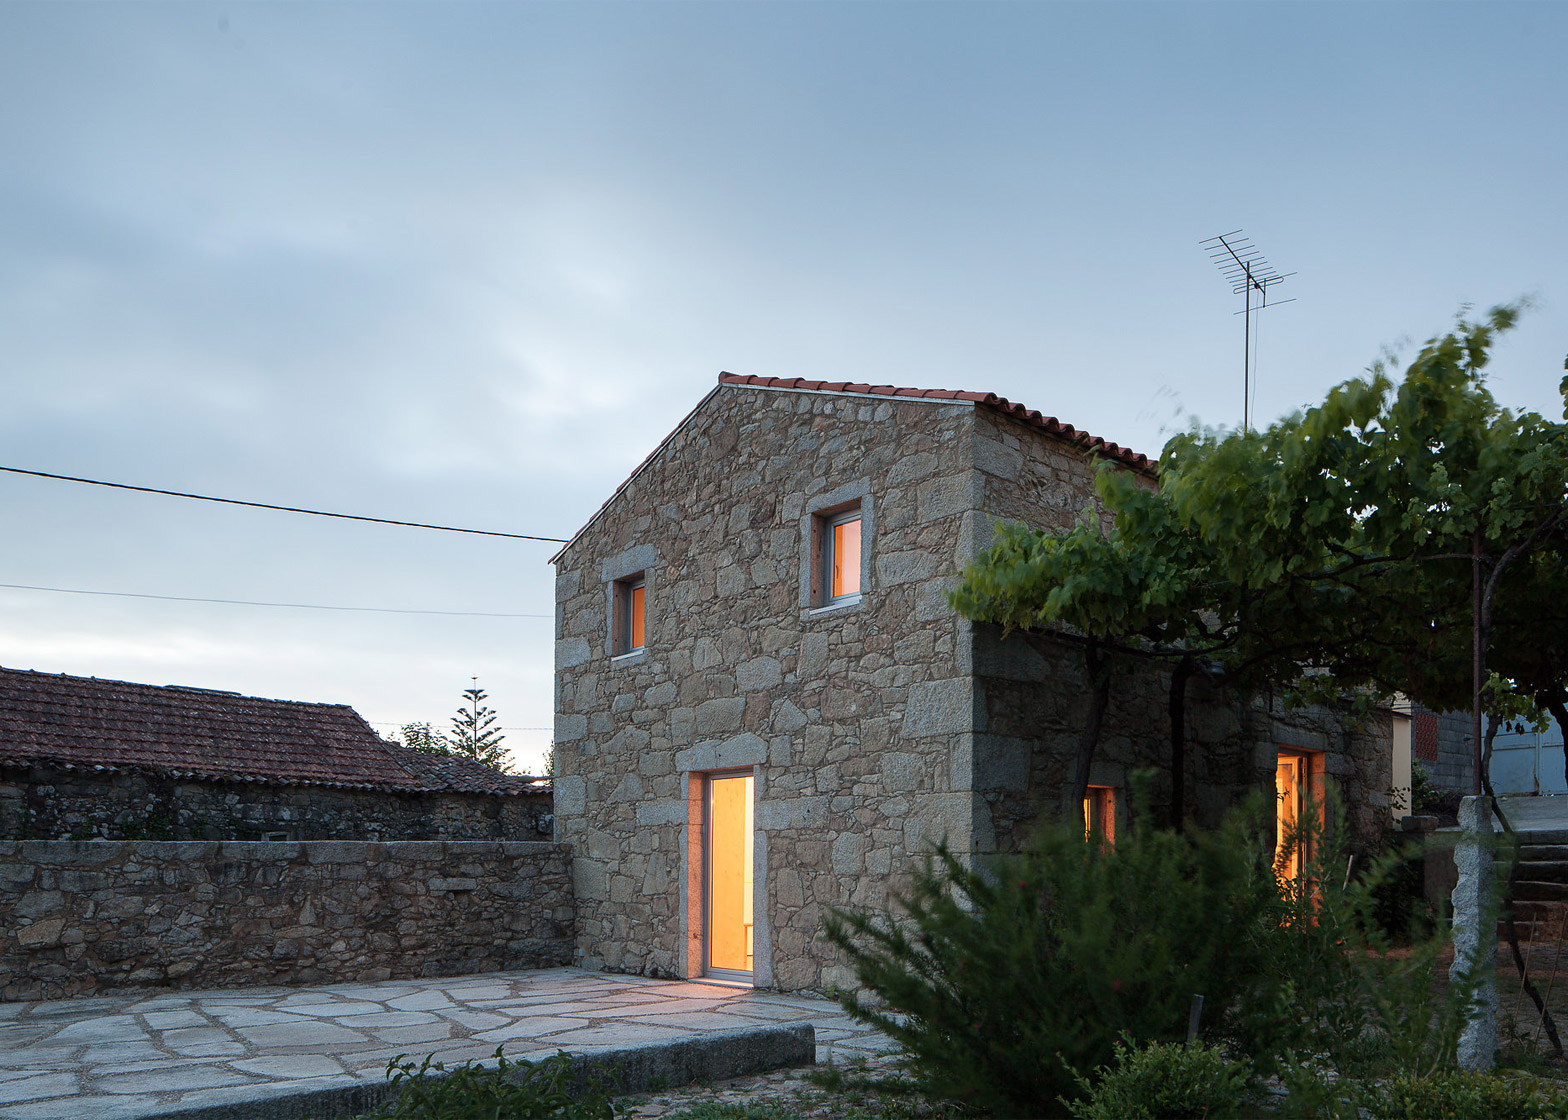 Restored, rustic and rural mini cottage in typical Portuguese